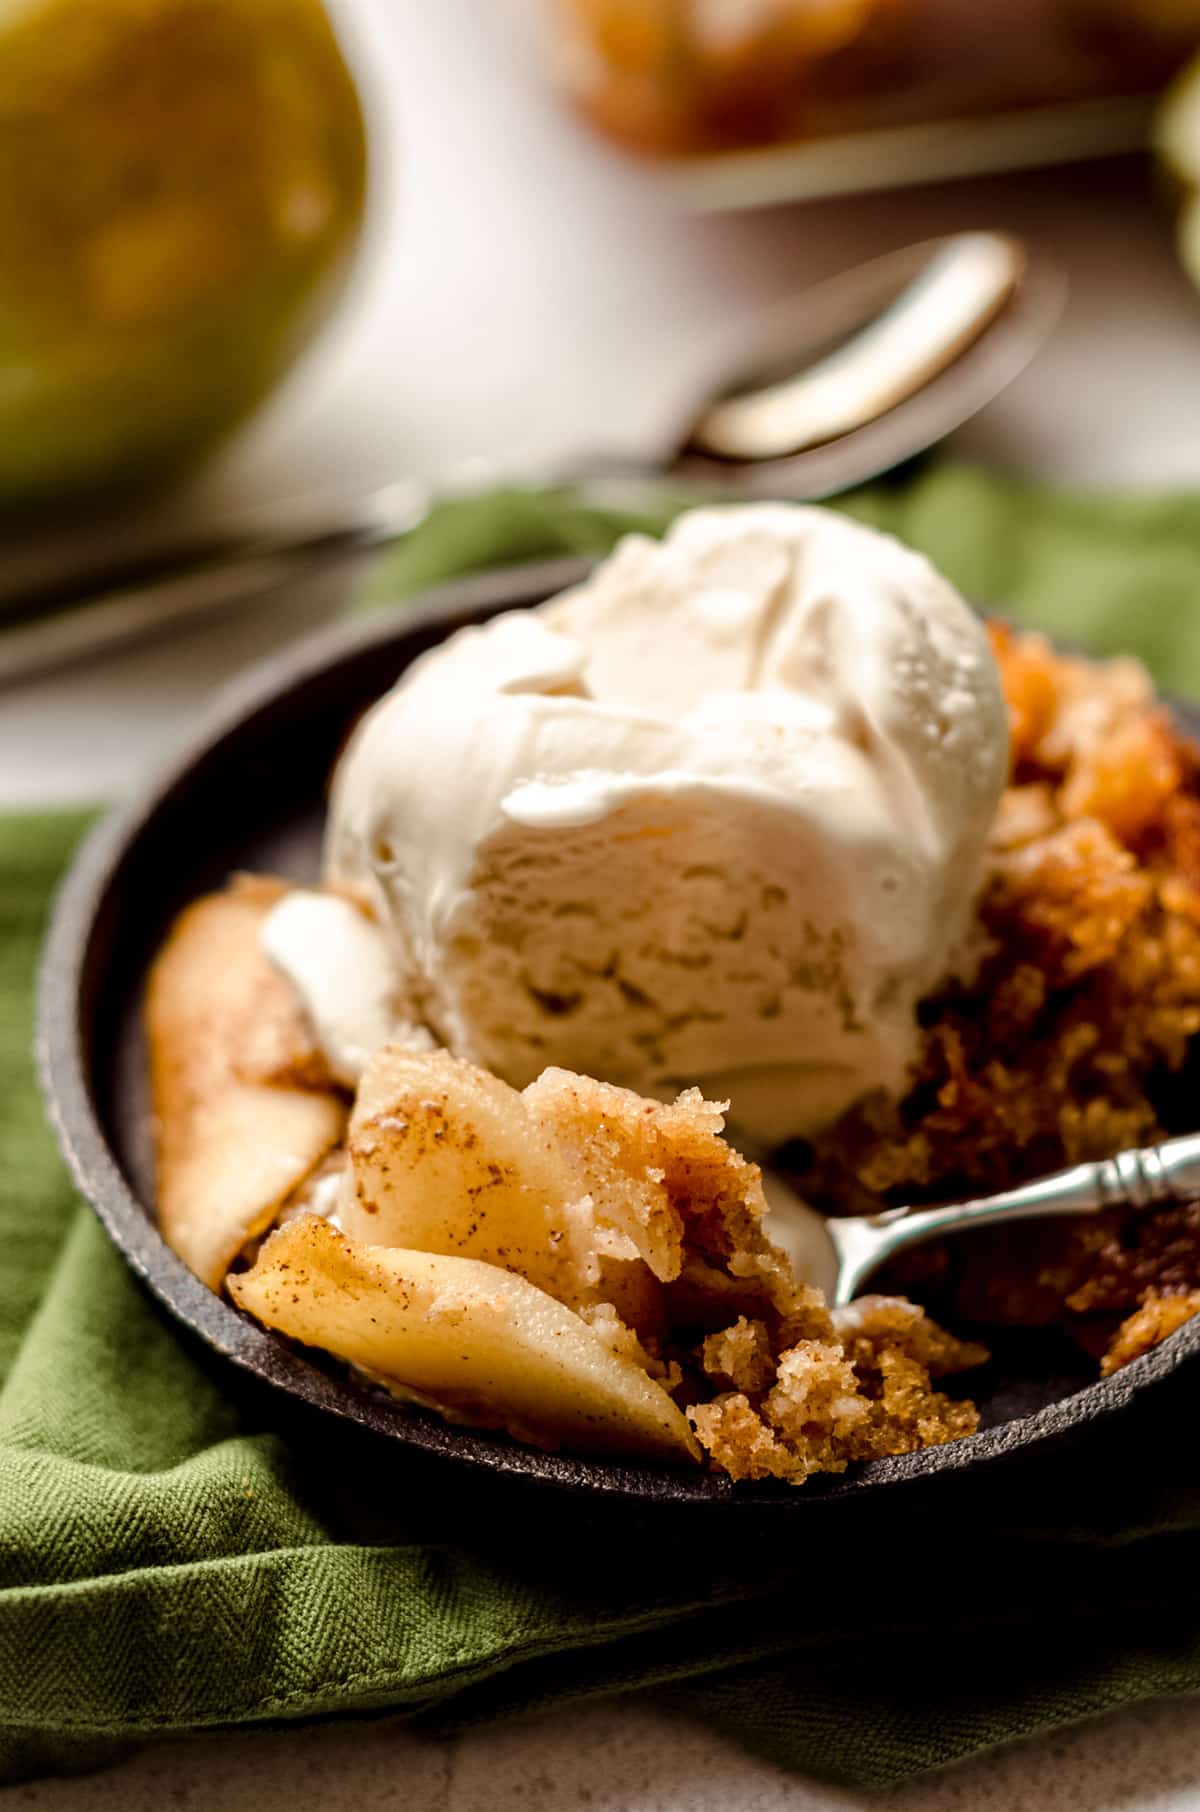 pear cobbler with a scoop of ice cream on top